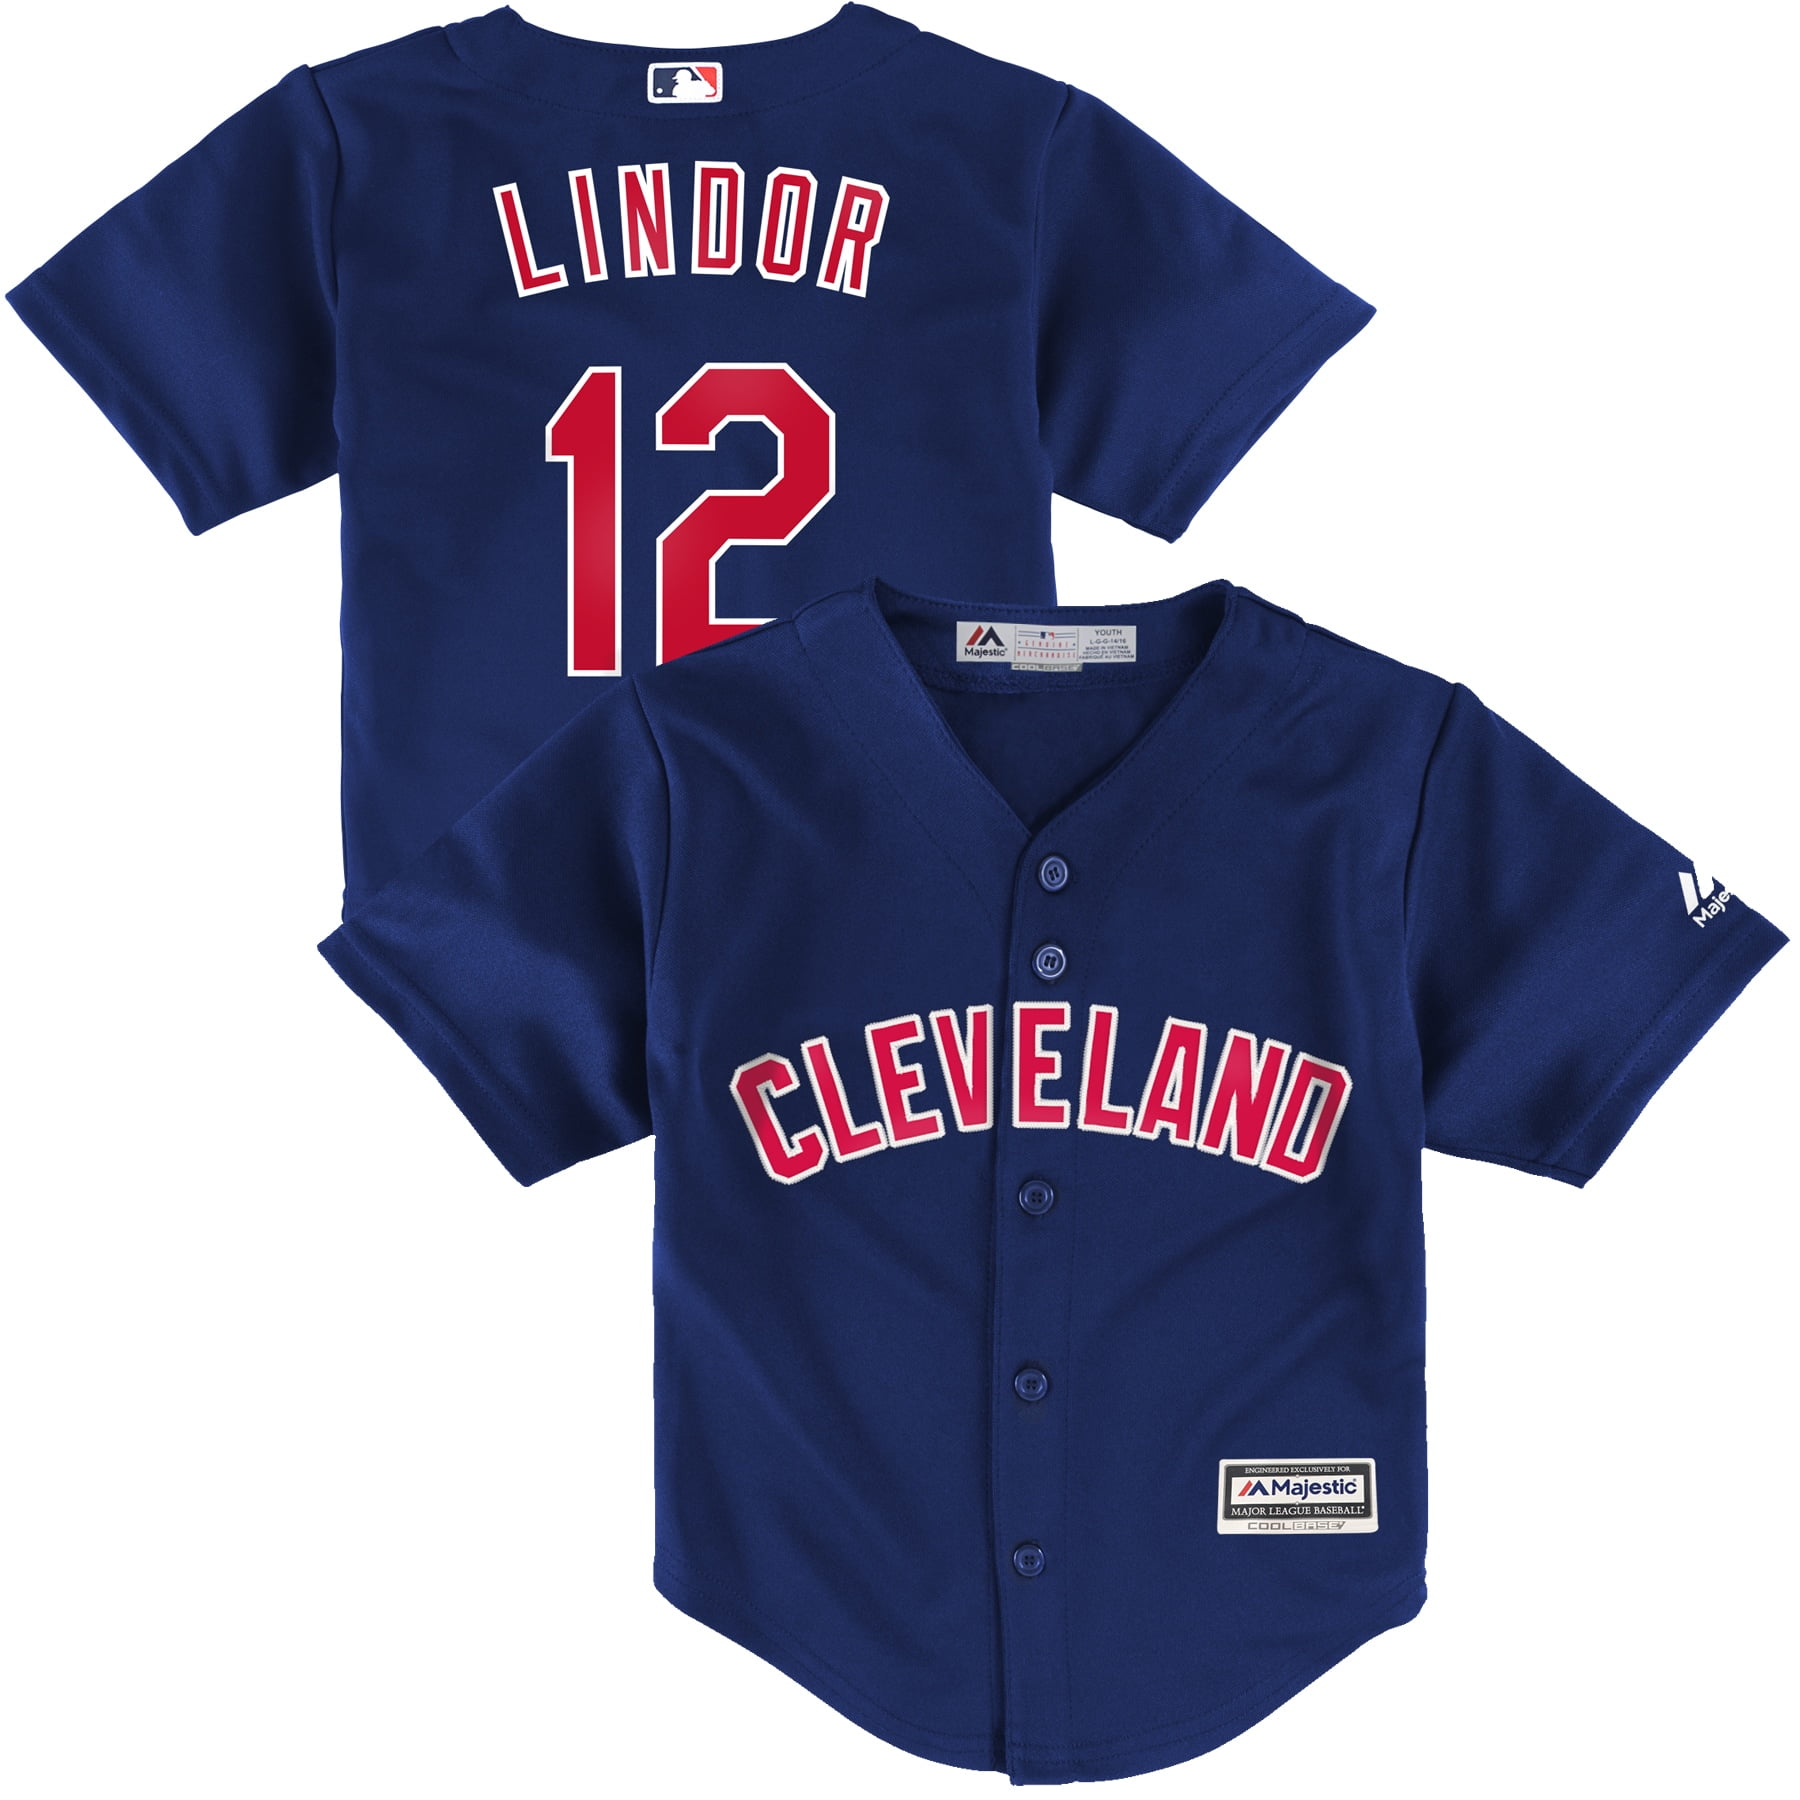 official cleveland indians jersey